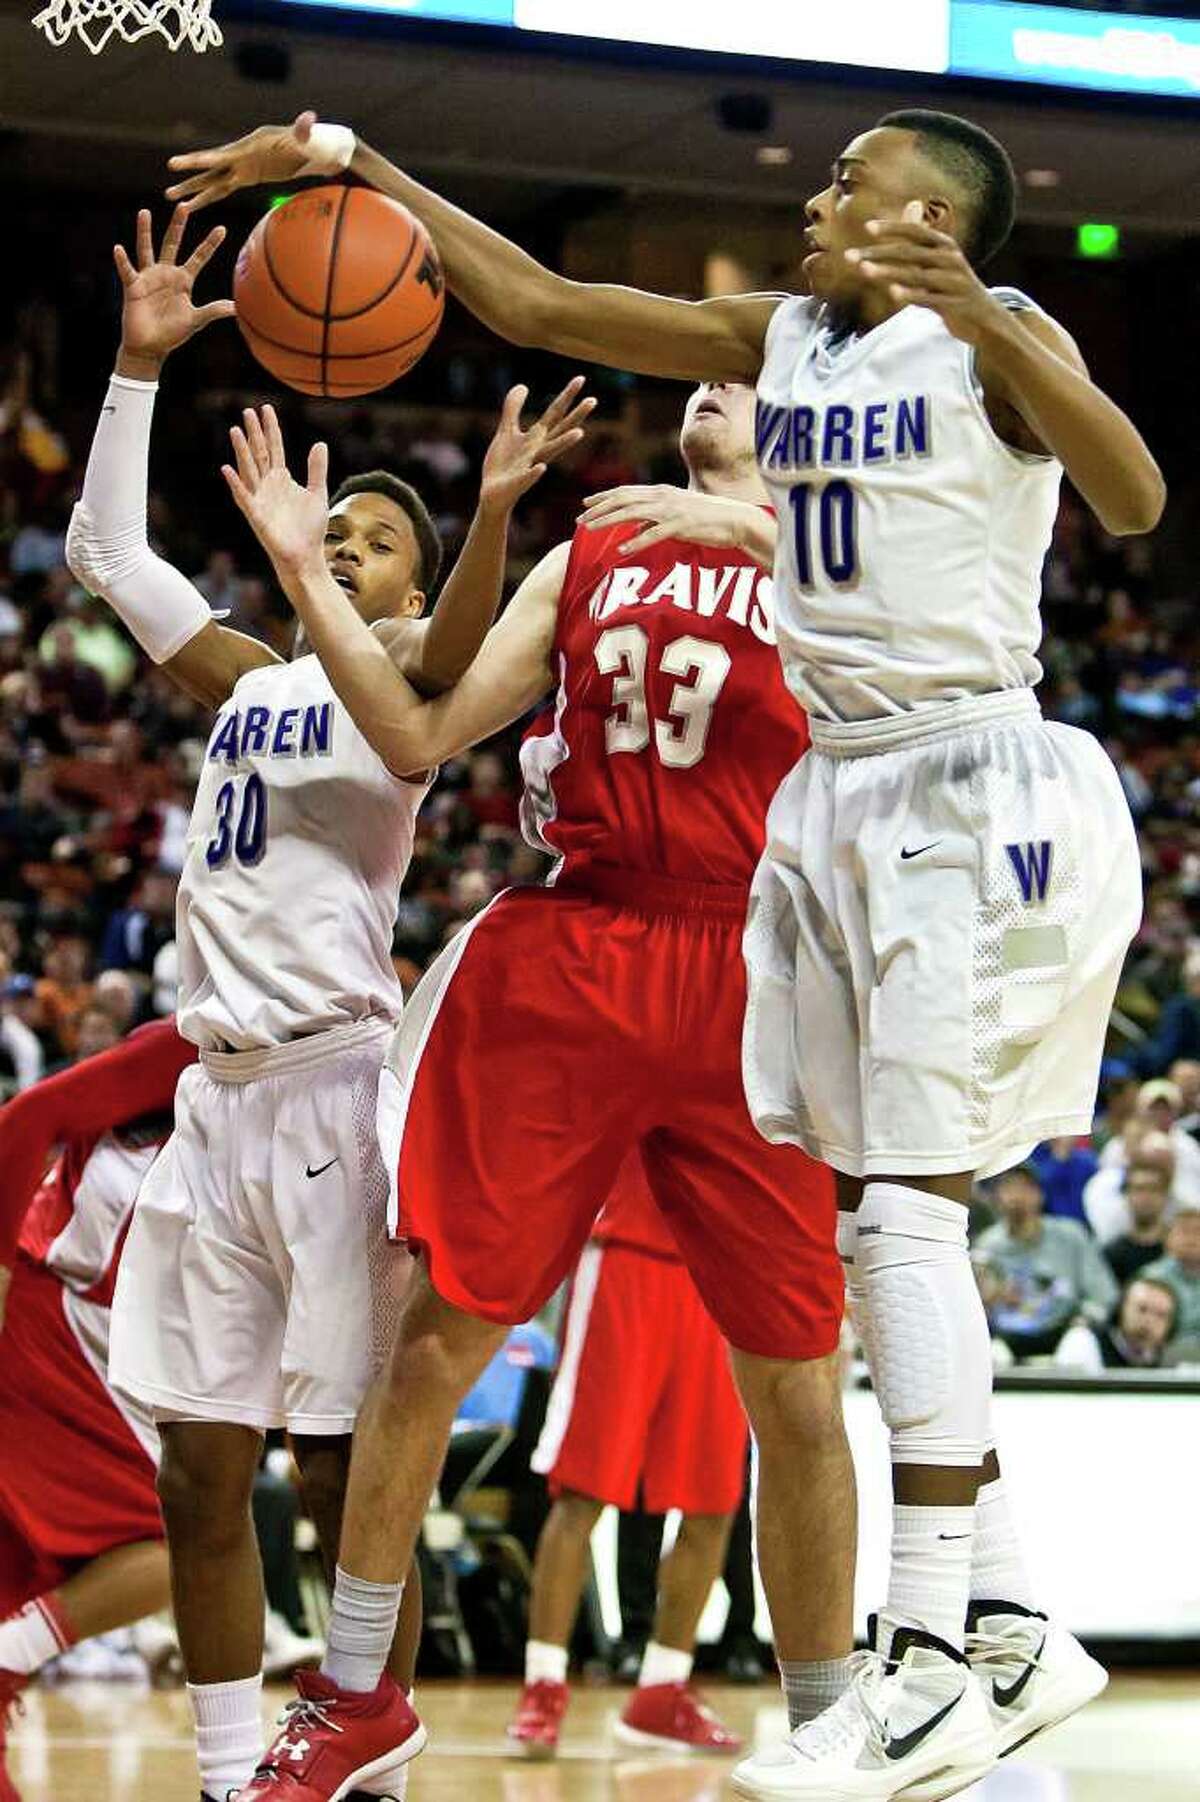 Warren's Pris Collins (right) and Jerell Ellis fight for a fourth quarter rebound with Fort Bend Travis's Kyle Coulter during their 5A state semifinal game at the Frank Erwin Center in Austin on March 9, 2012. MARVIN PFEIFFER/ mpfeiffer@express-news.net